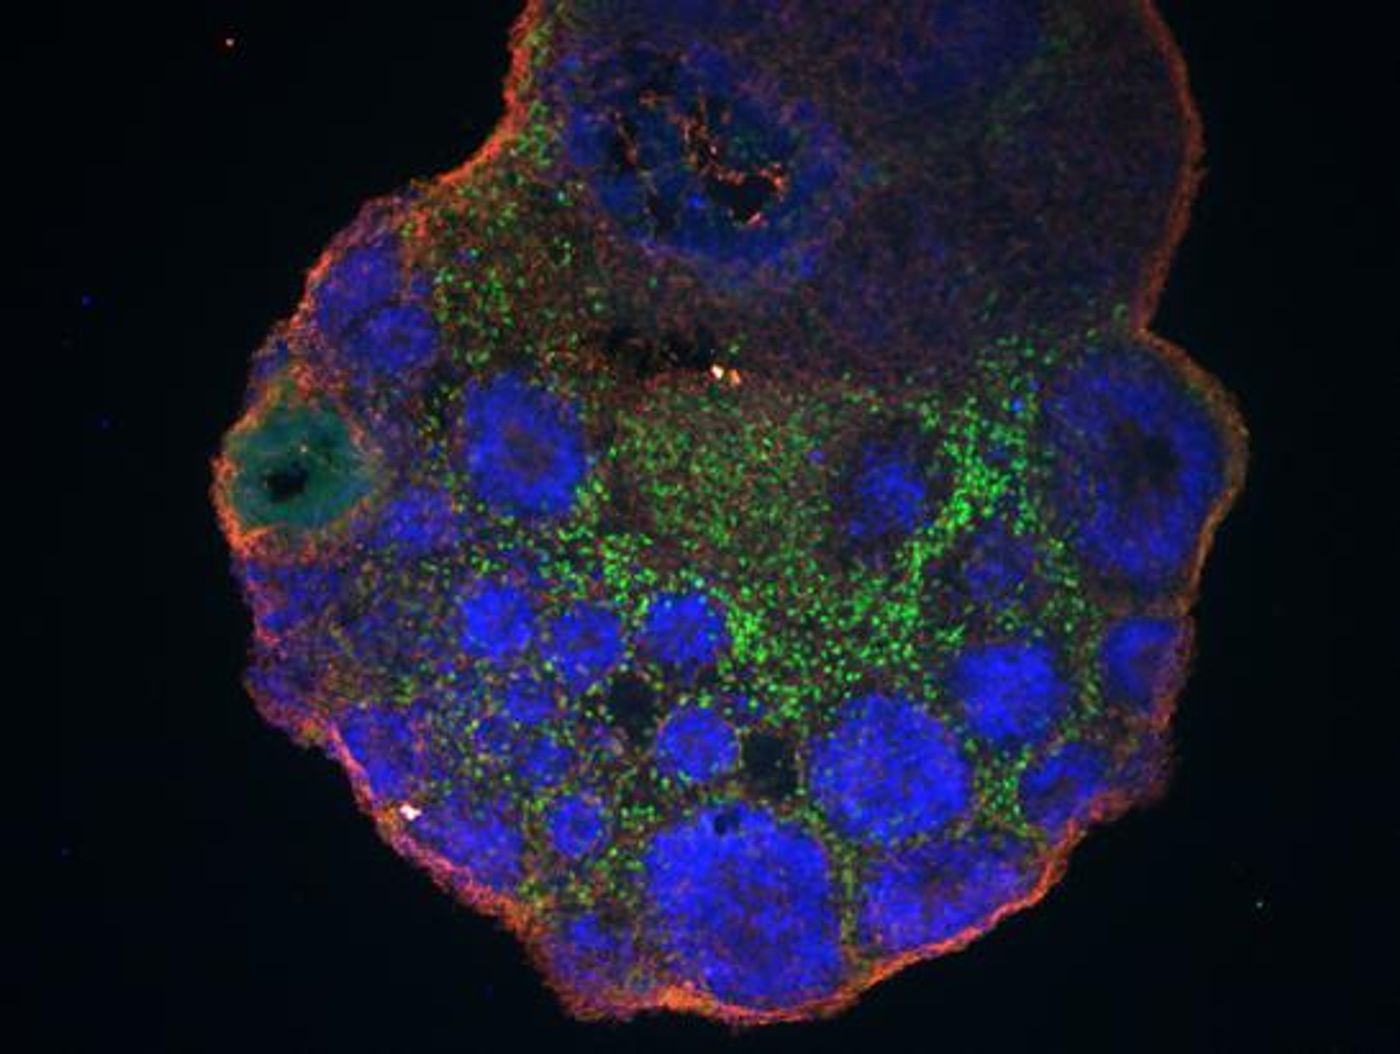 Studying lab-grown cerebral organoids (one derived from chimpanzee cells, shown) has helped scientists discover genes active only in developing human brains. / Credit: Vincent Meng and Andrew Field